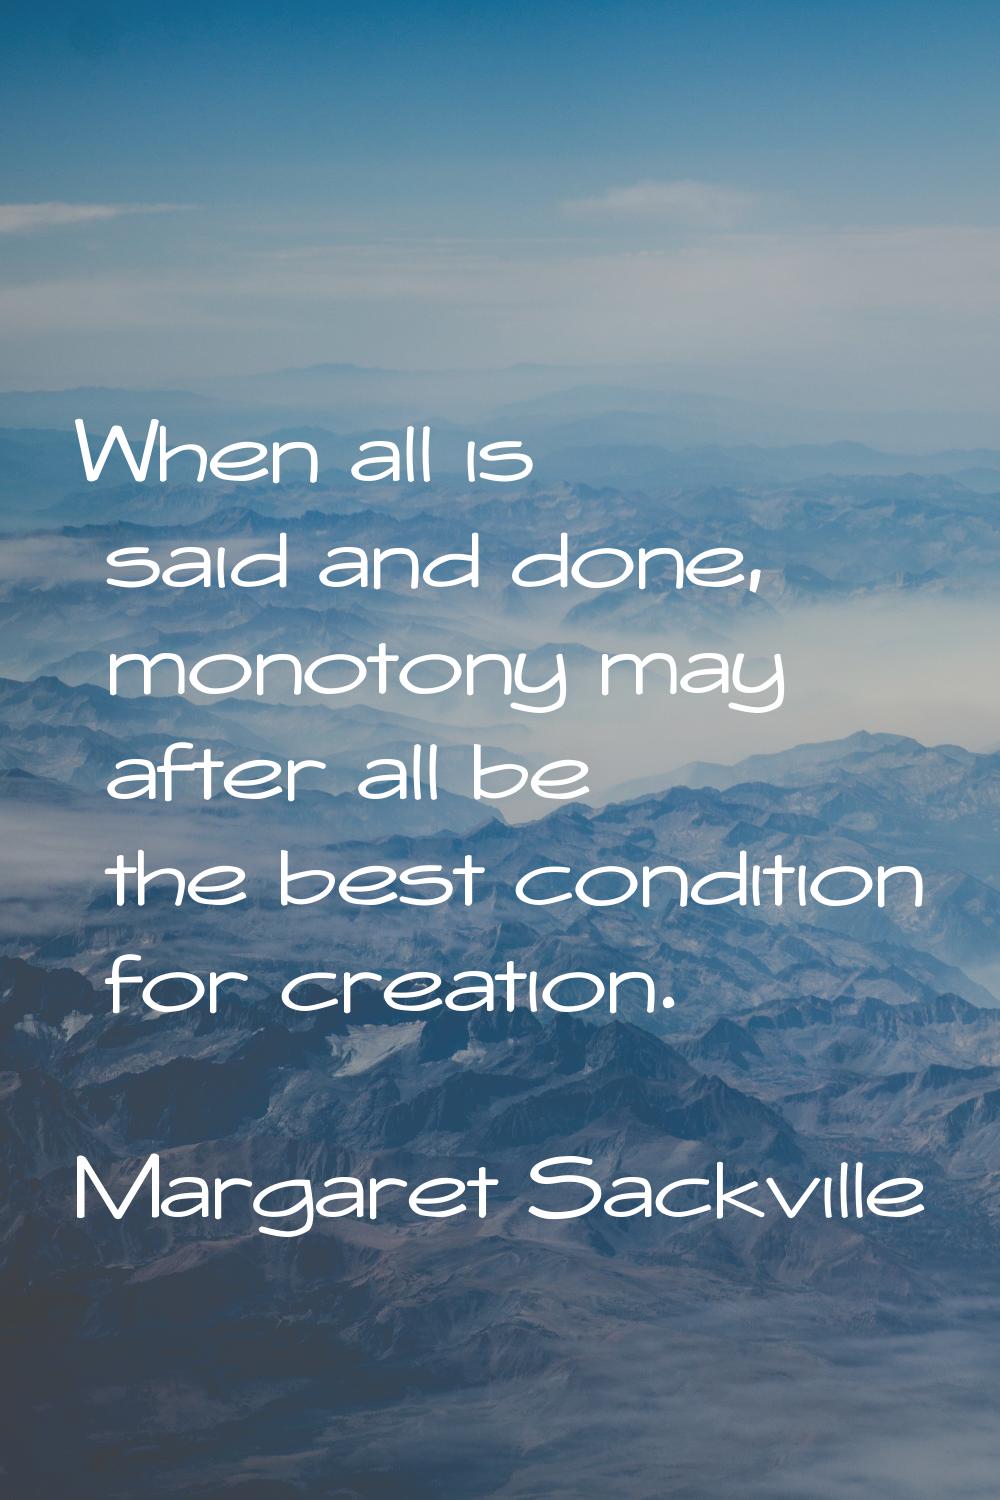 When all is said and done, monotony may after all be the best condition for creation.